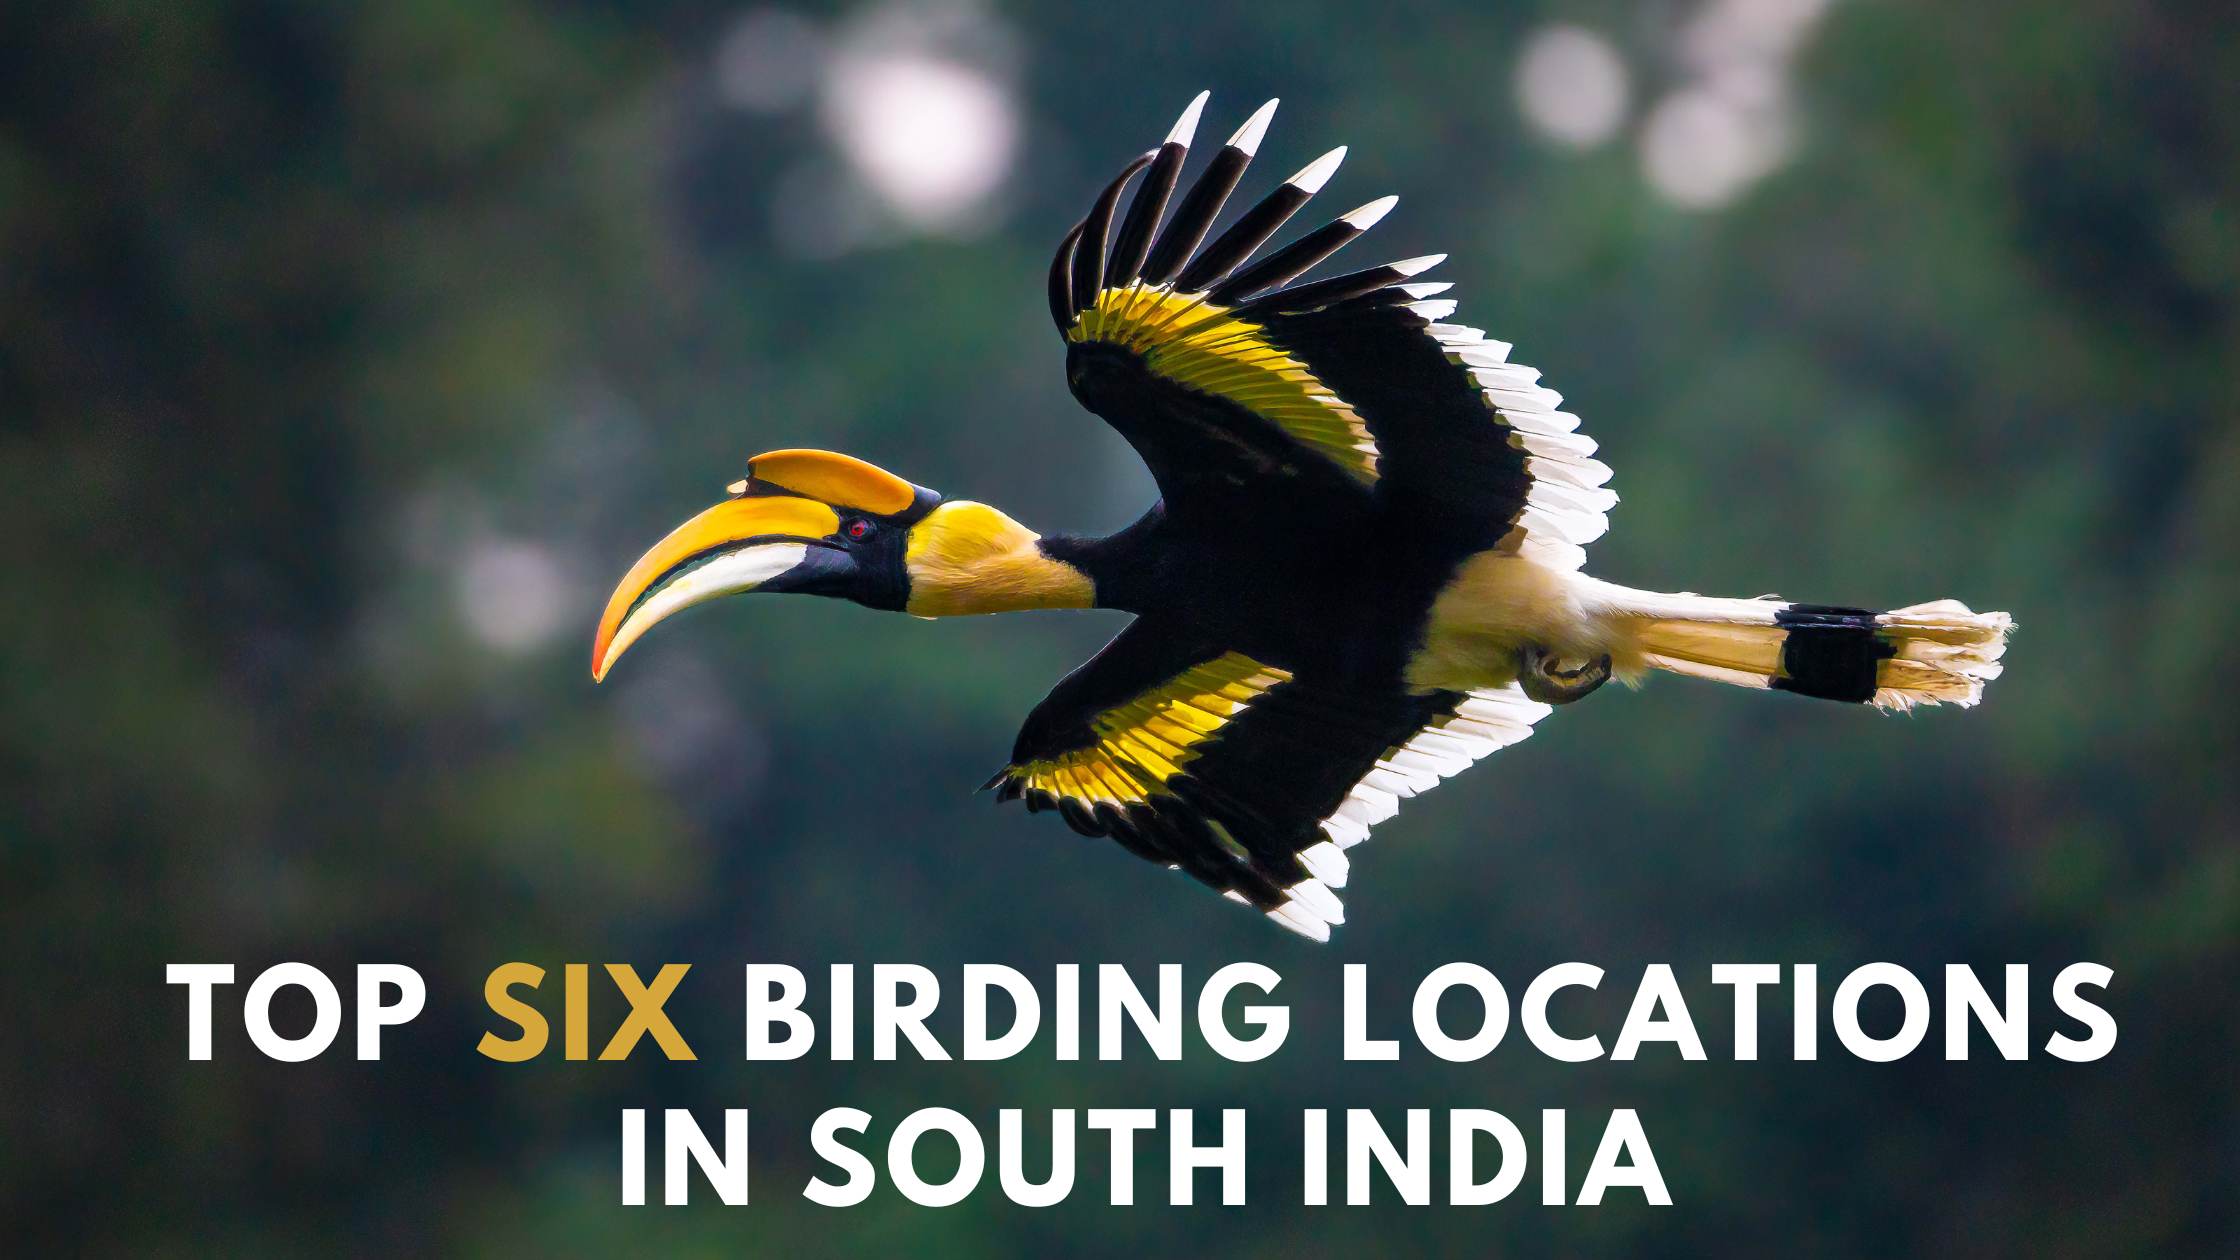 Six birding locations in South India